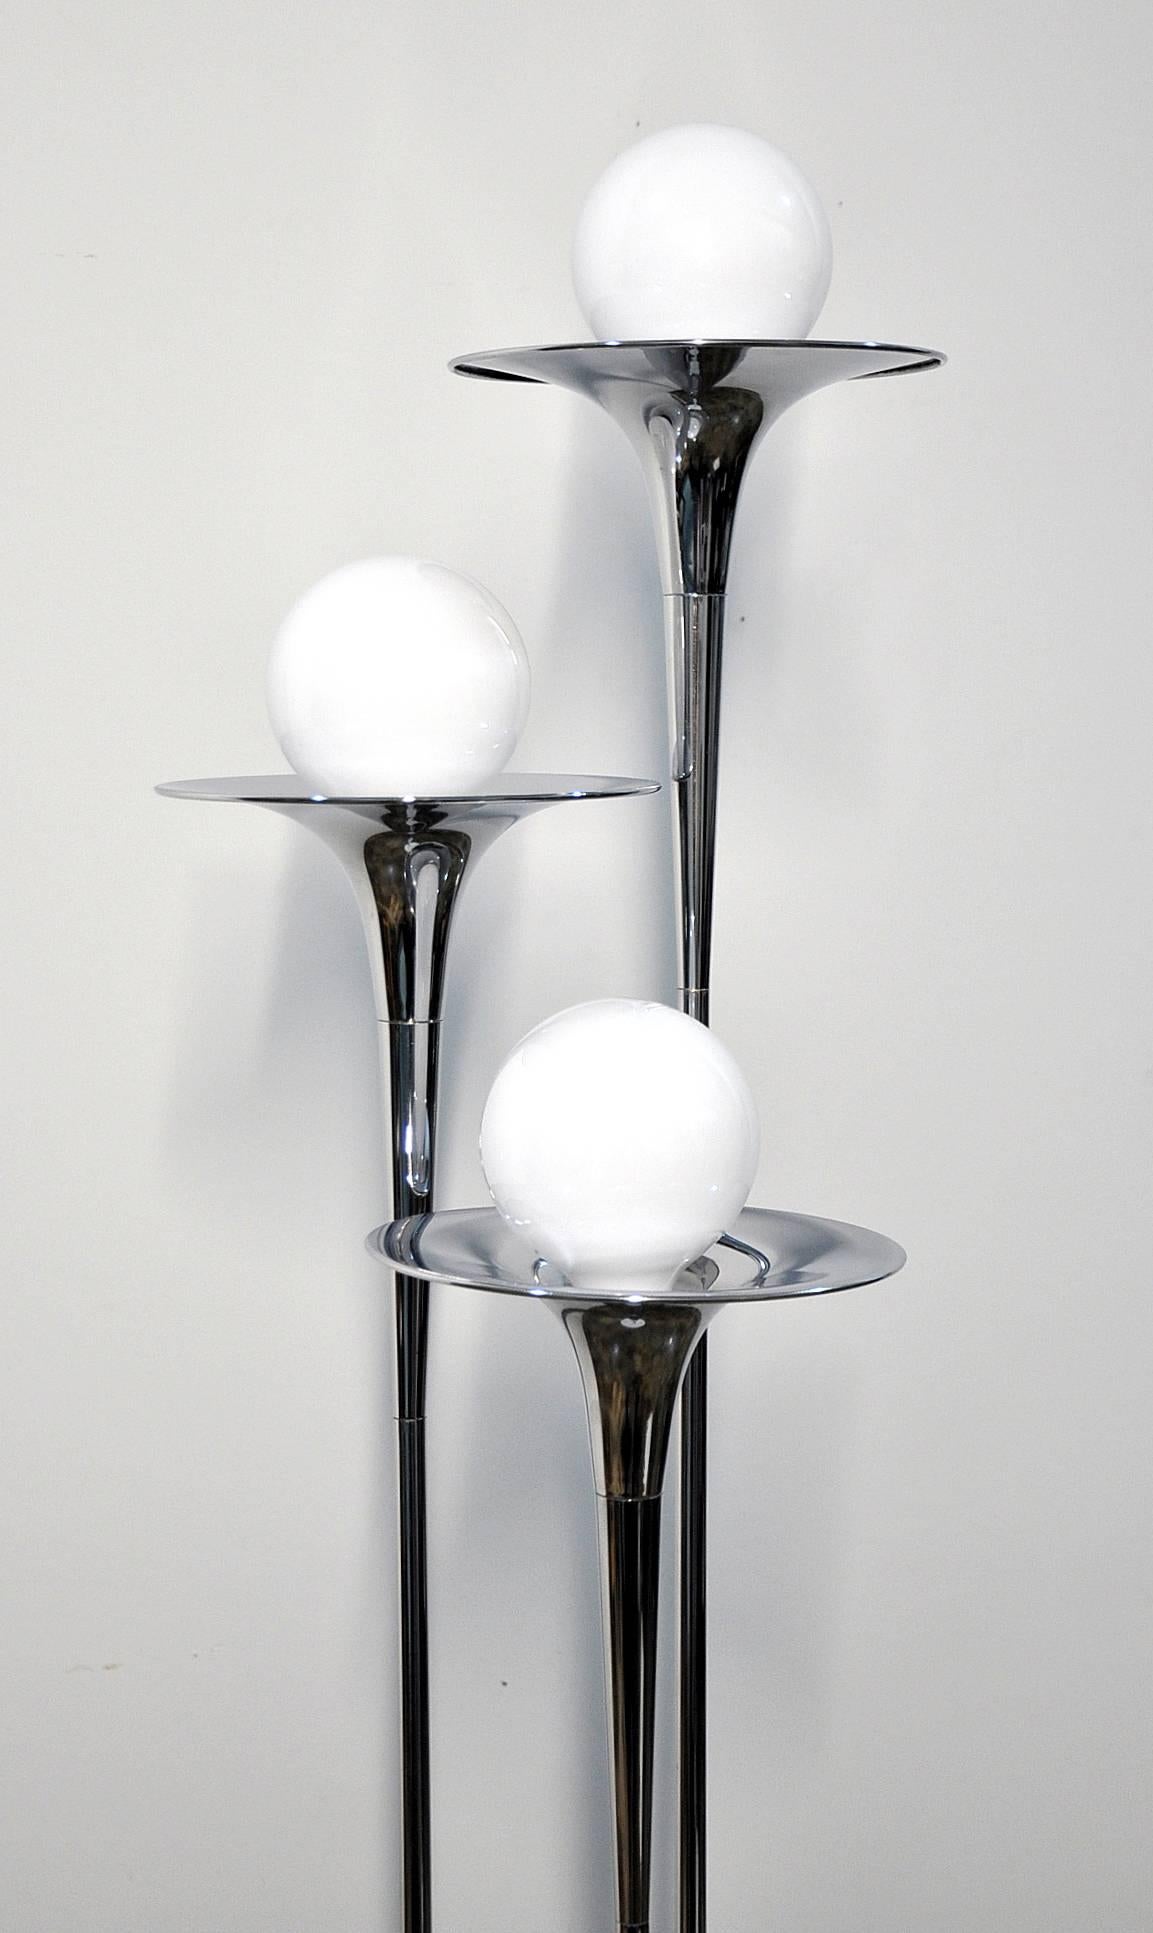 Gorgeous polished chrome vintage floor lamp with three trumpet shaped shafts and white enameled base, dating from the 1970s. Easily turns on and off with a slight push of the foot as switch is located on the base. Sleek and stylish design that not